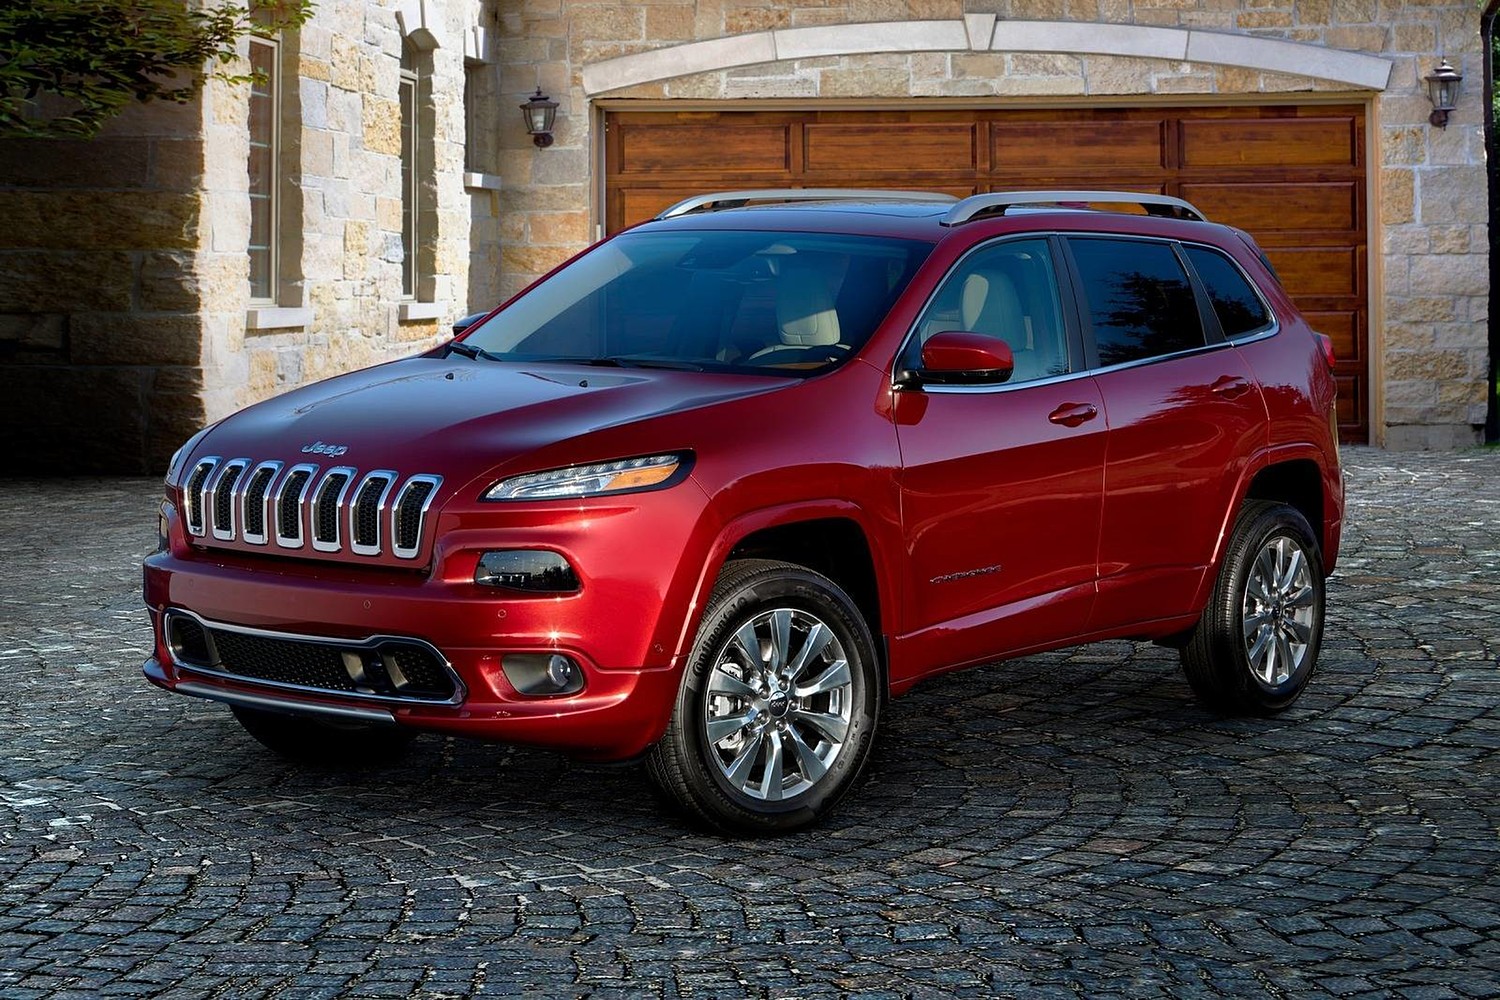 2018 Jeep Cherokee Overland 4dr SUV Exterior